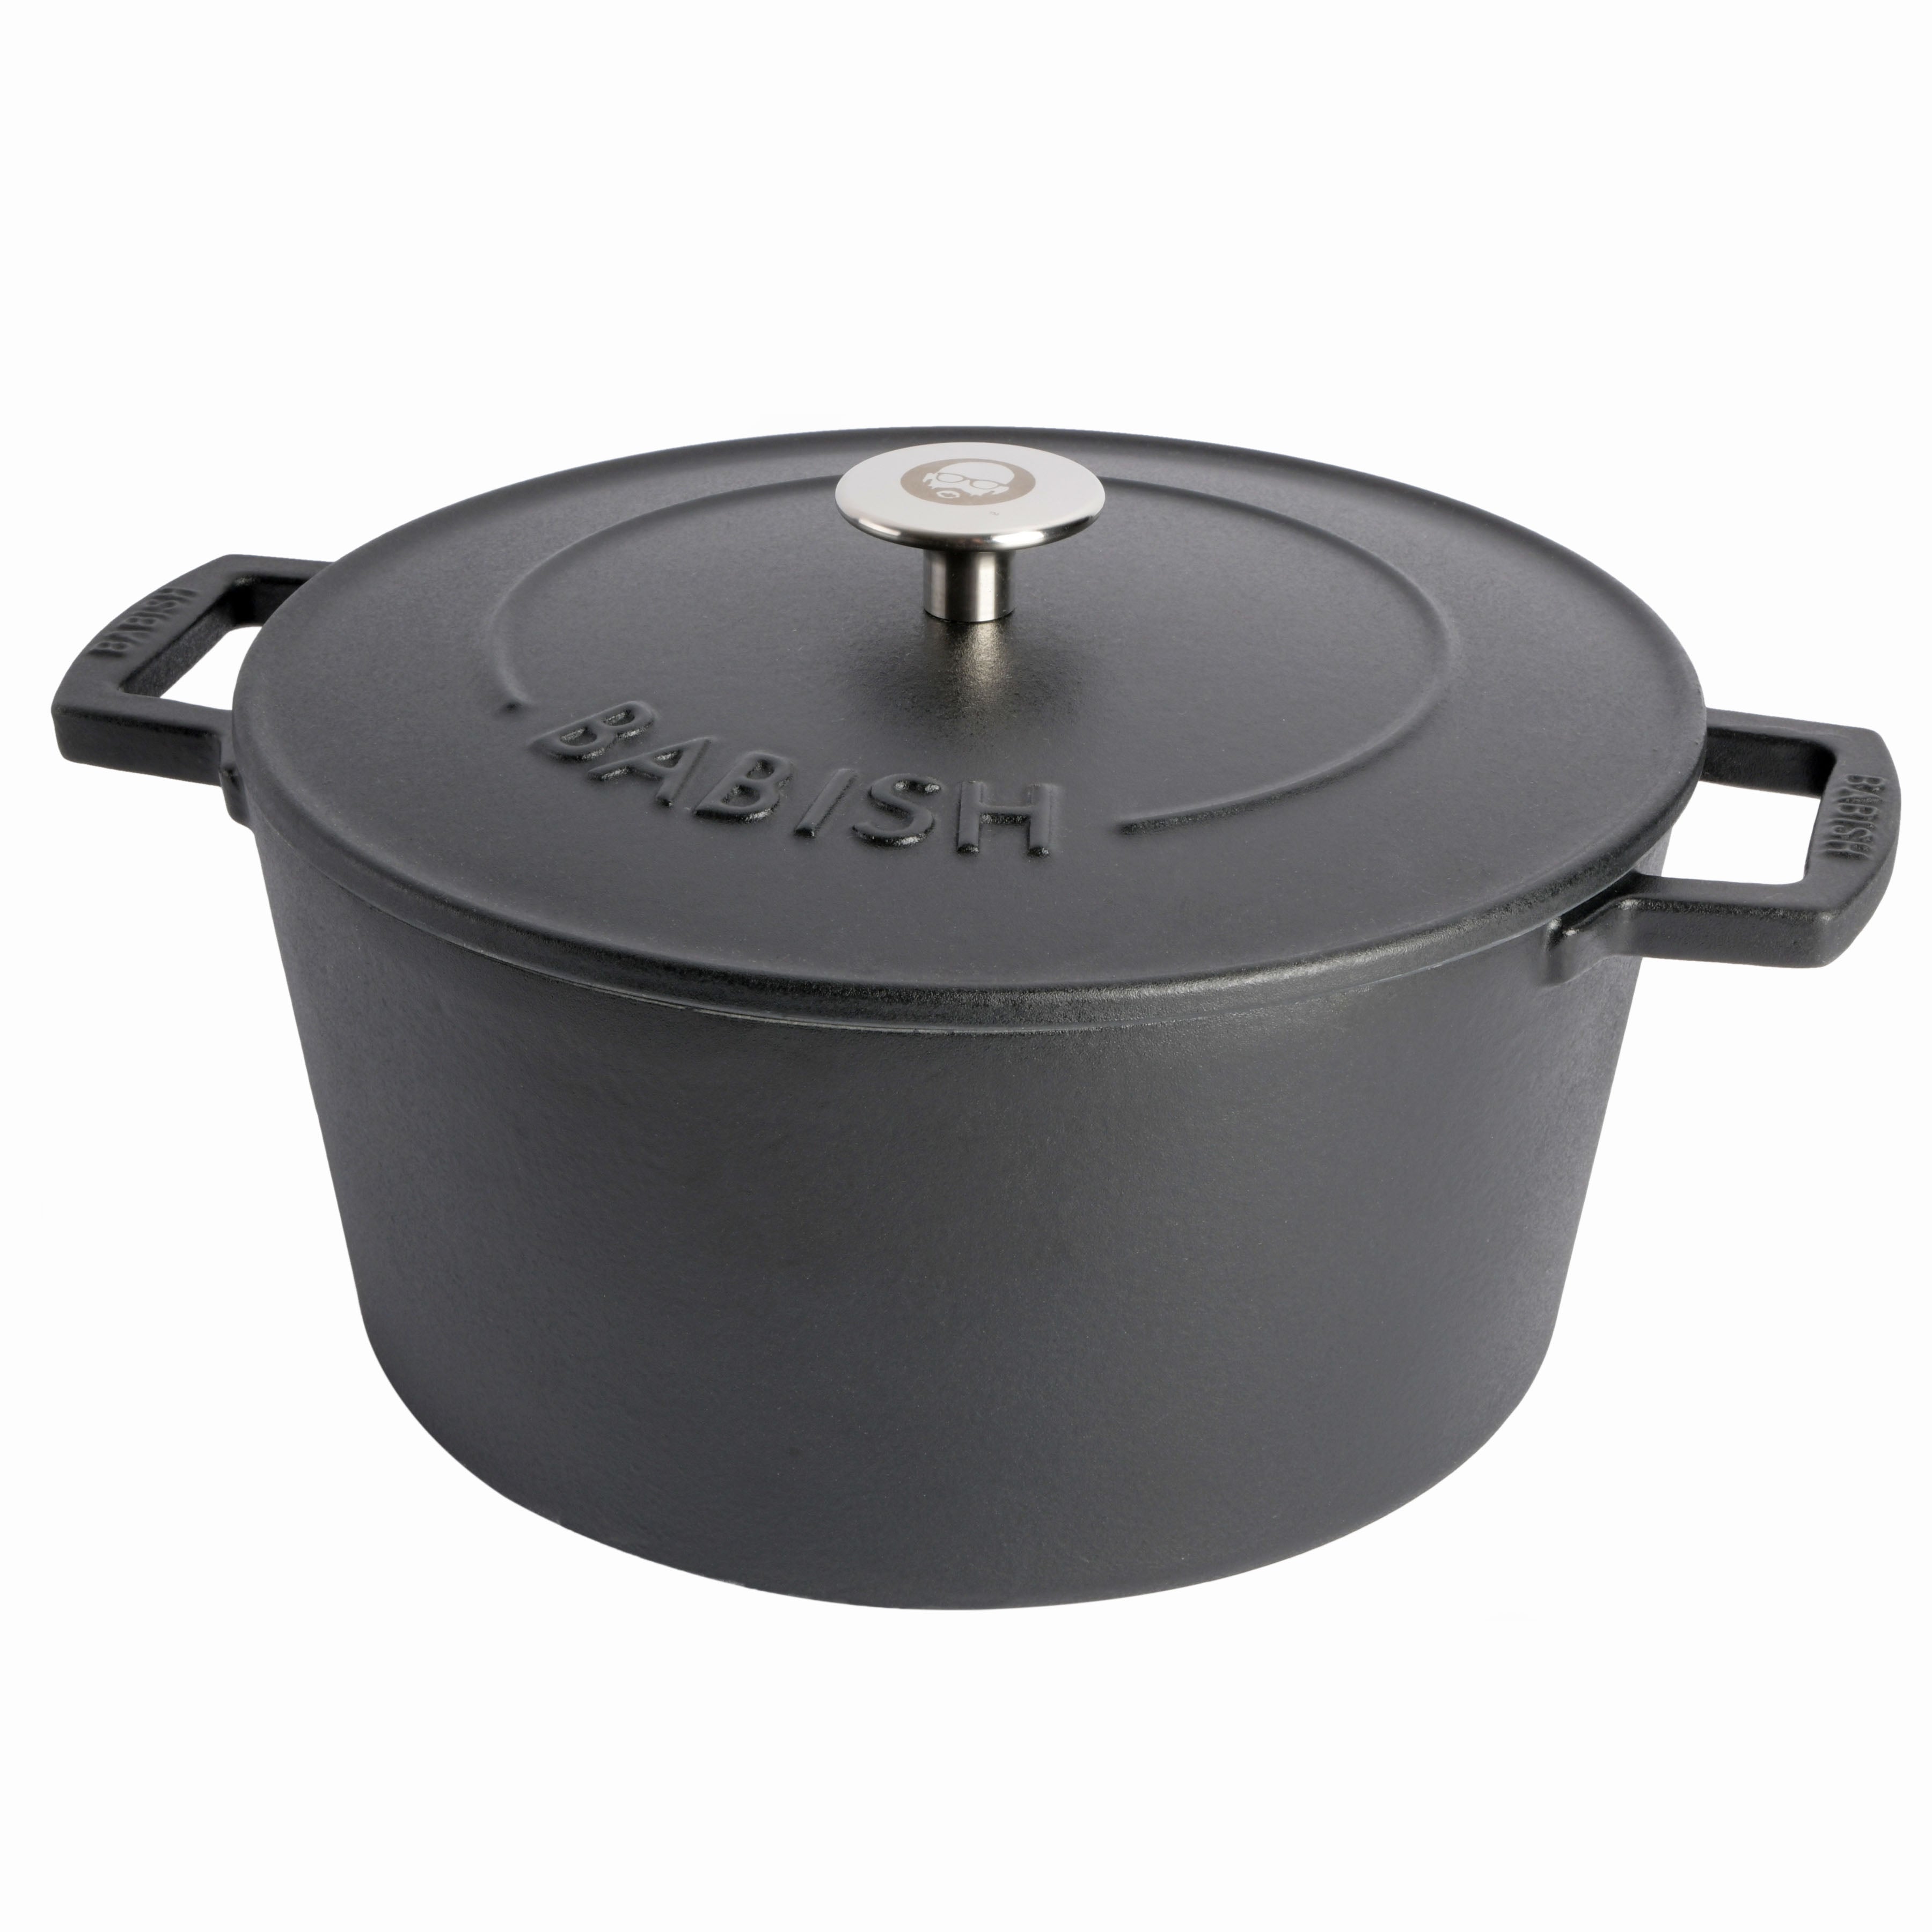 Introducing the Babish Dutch Oven, now available. Link in bio.